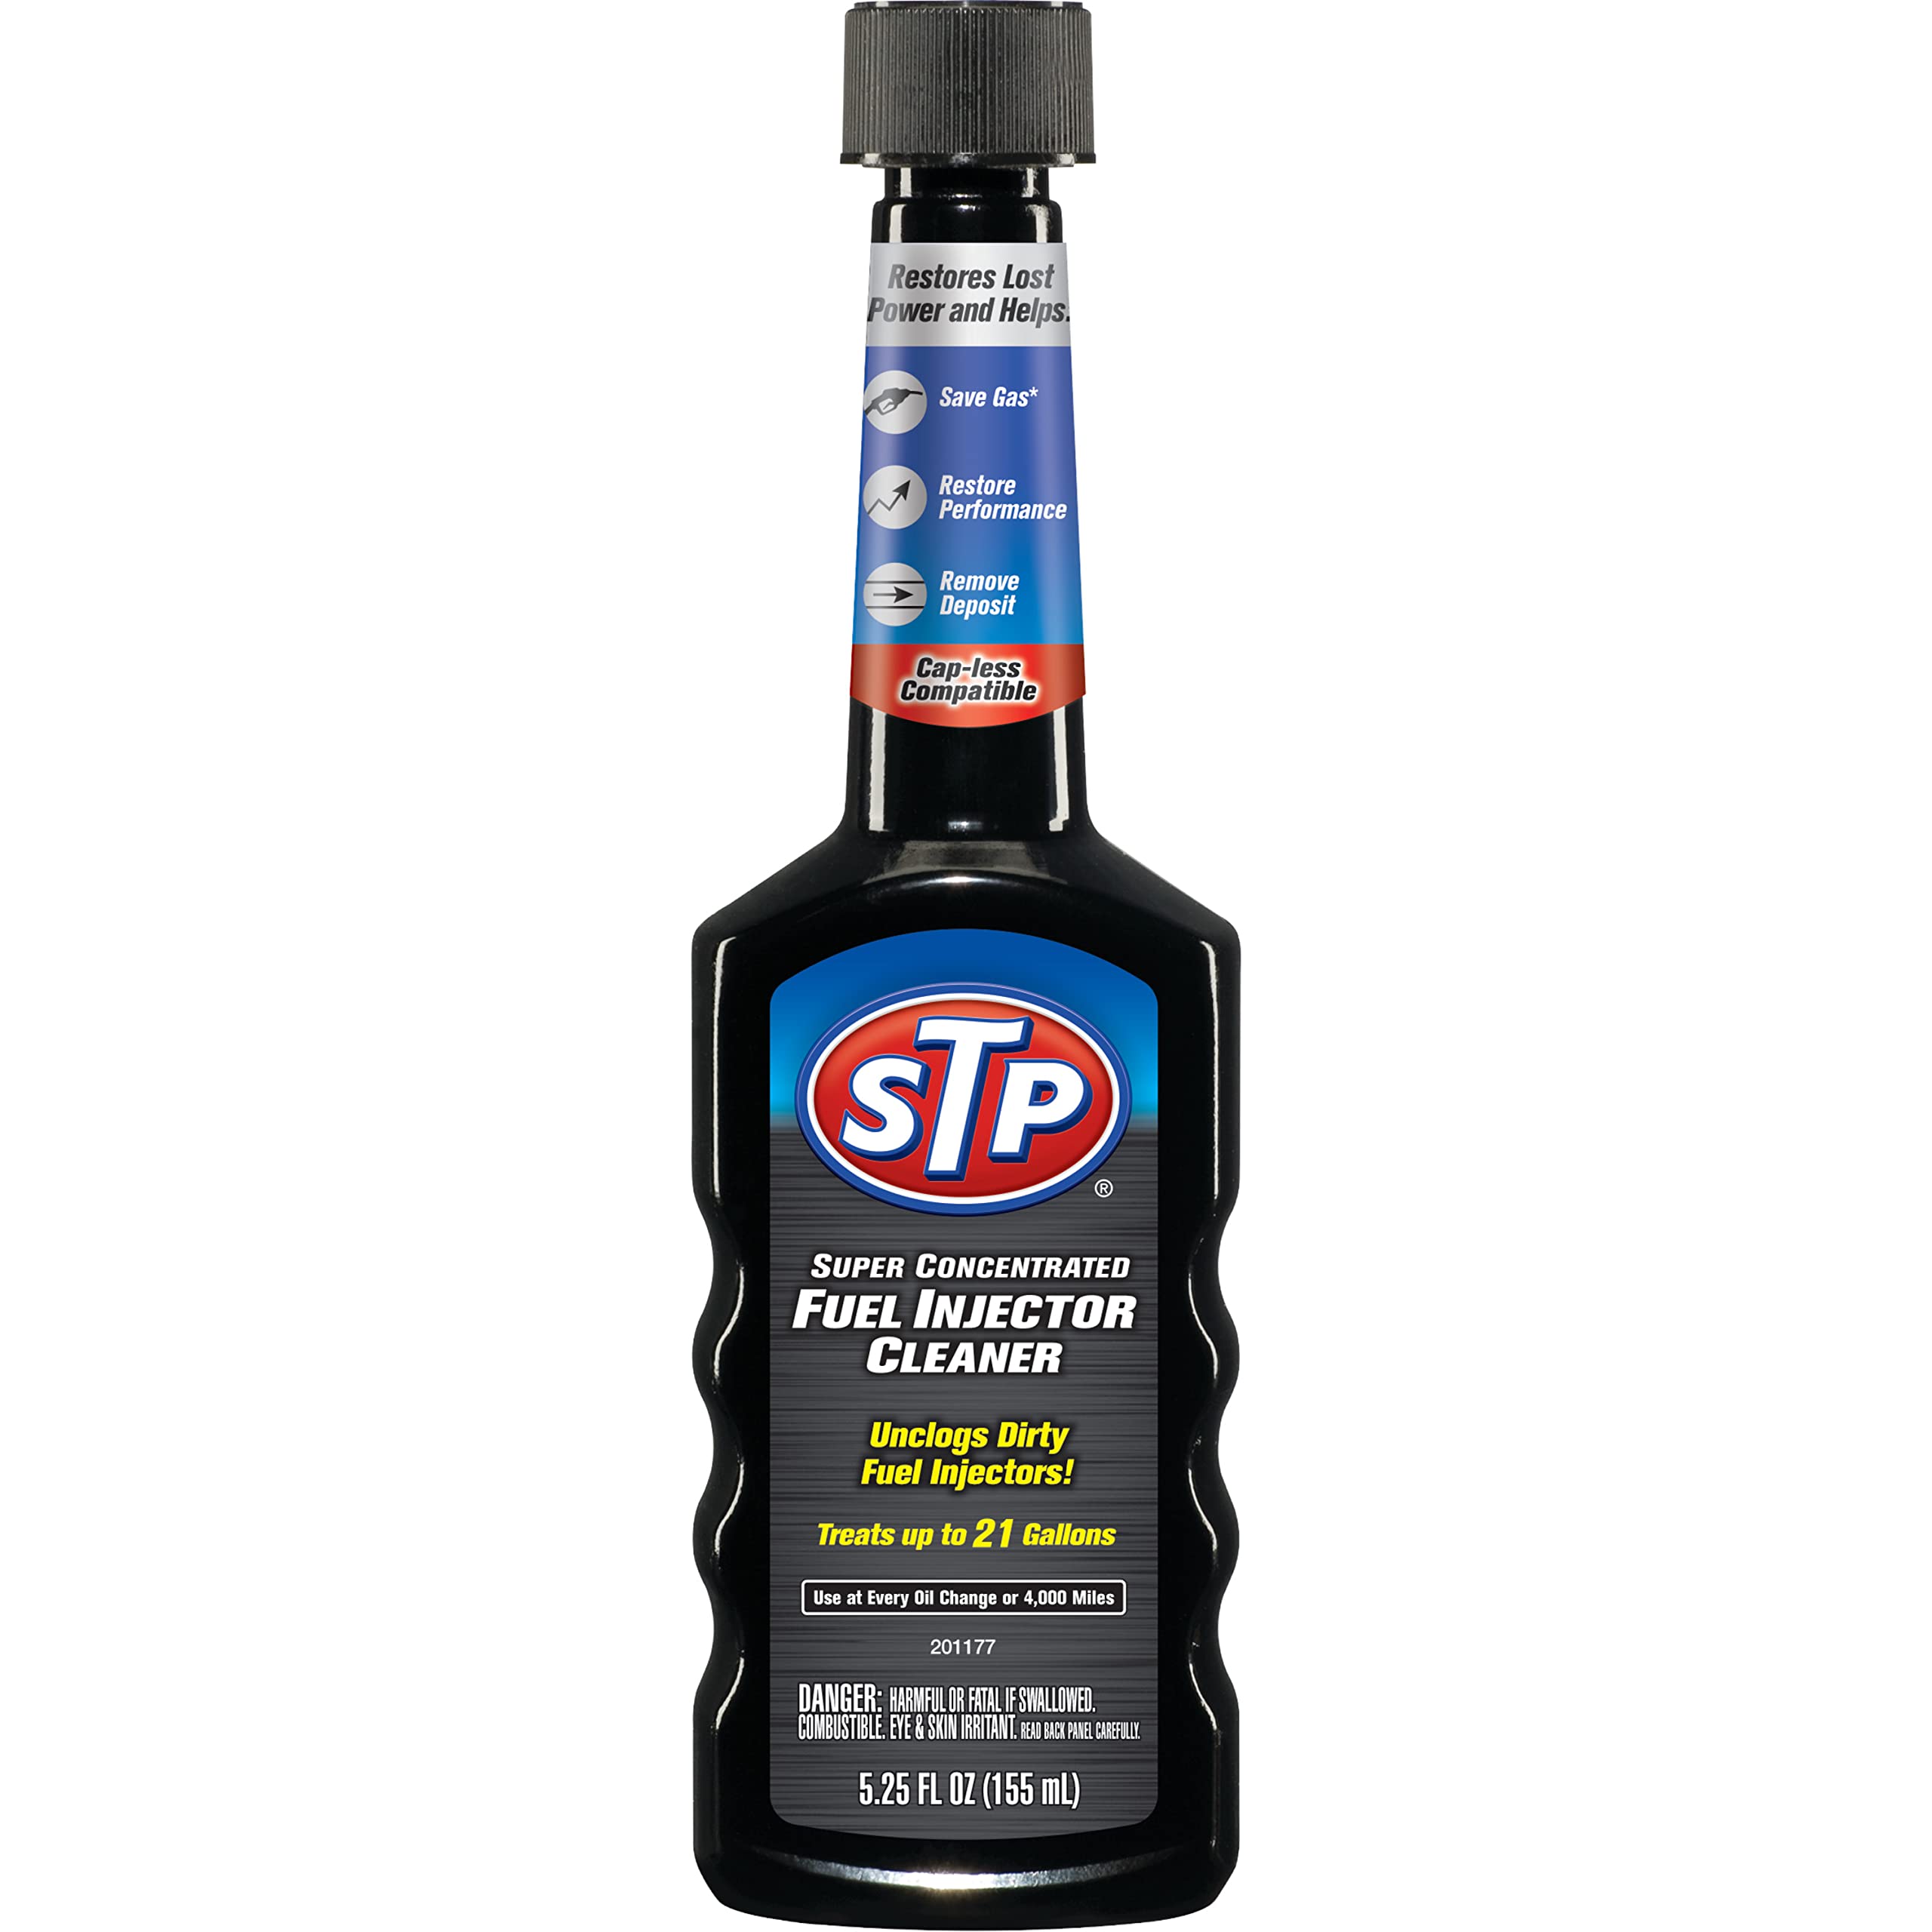 Is Stp Fuel Injector Cleaner Good